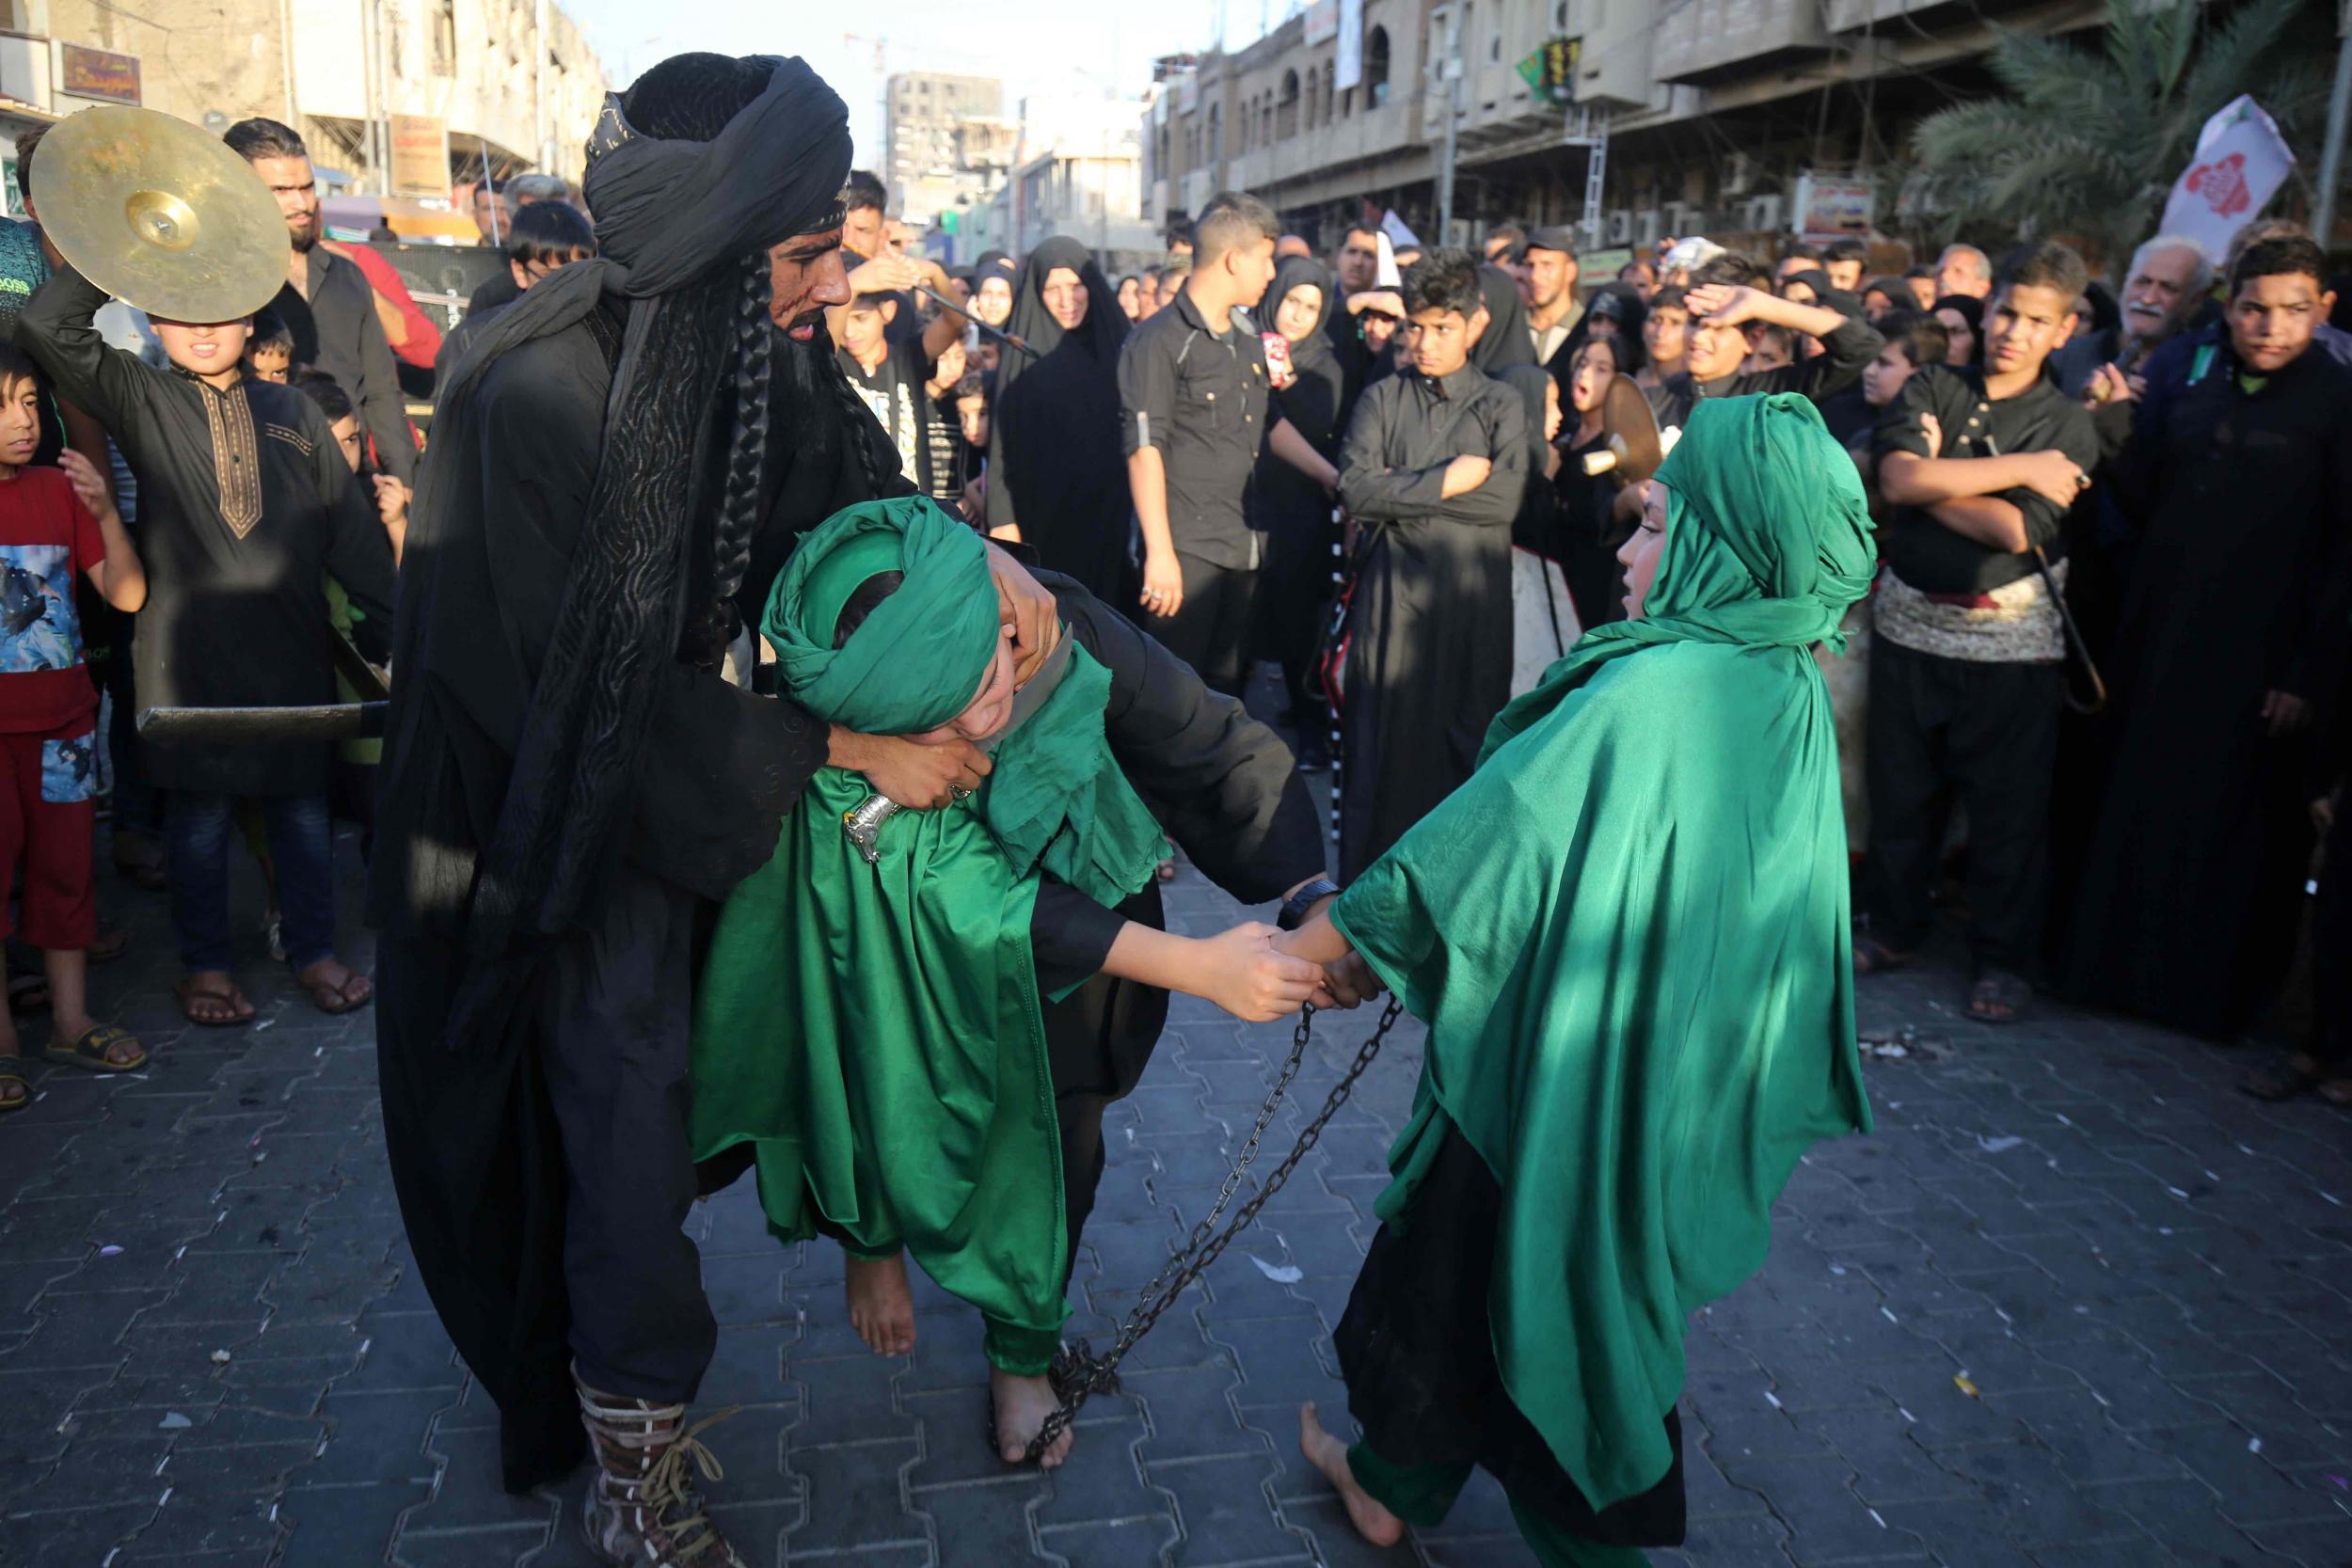 Iraqi Shiite children and a man perform during the reenactment of the Battle of Karbala, as part of a parade in preparation for the peak of the mourning period of Ashura on October 7, 2016 in Baghdad's northern district of Kadhimiya